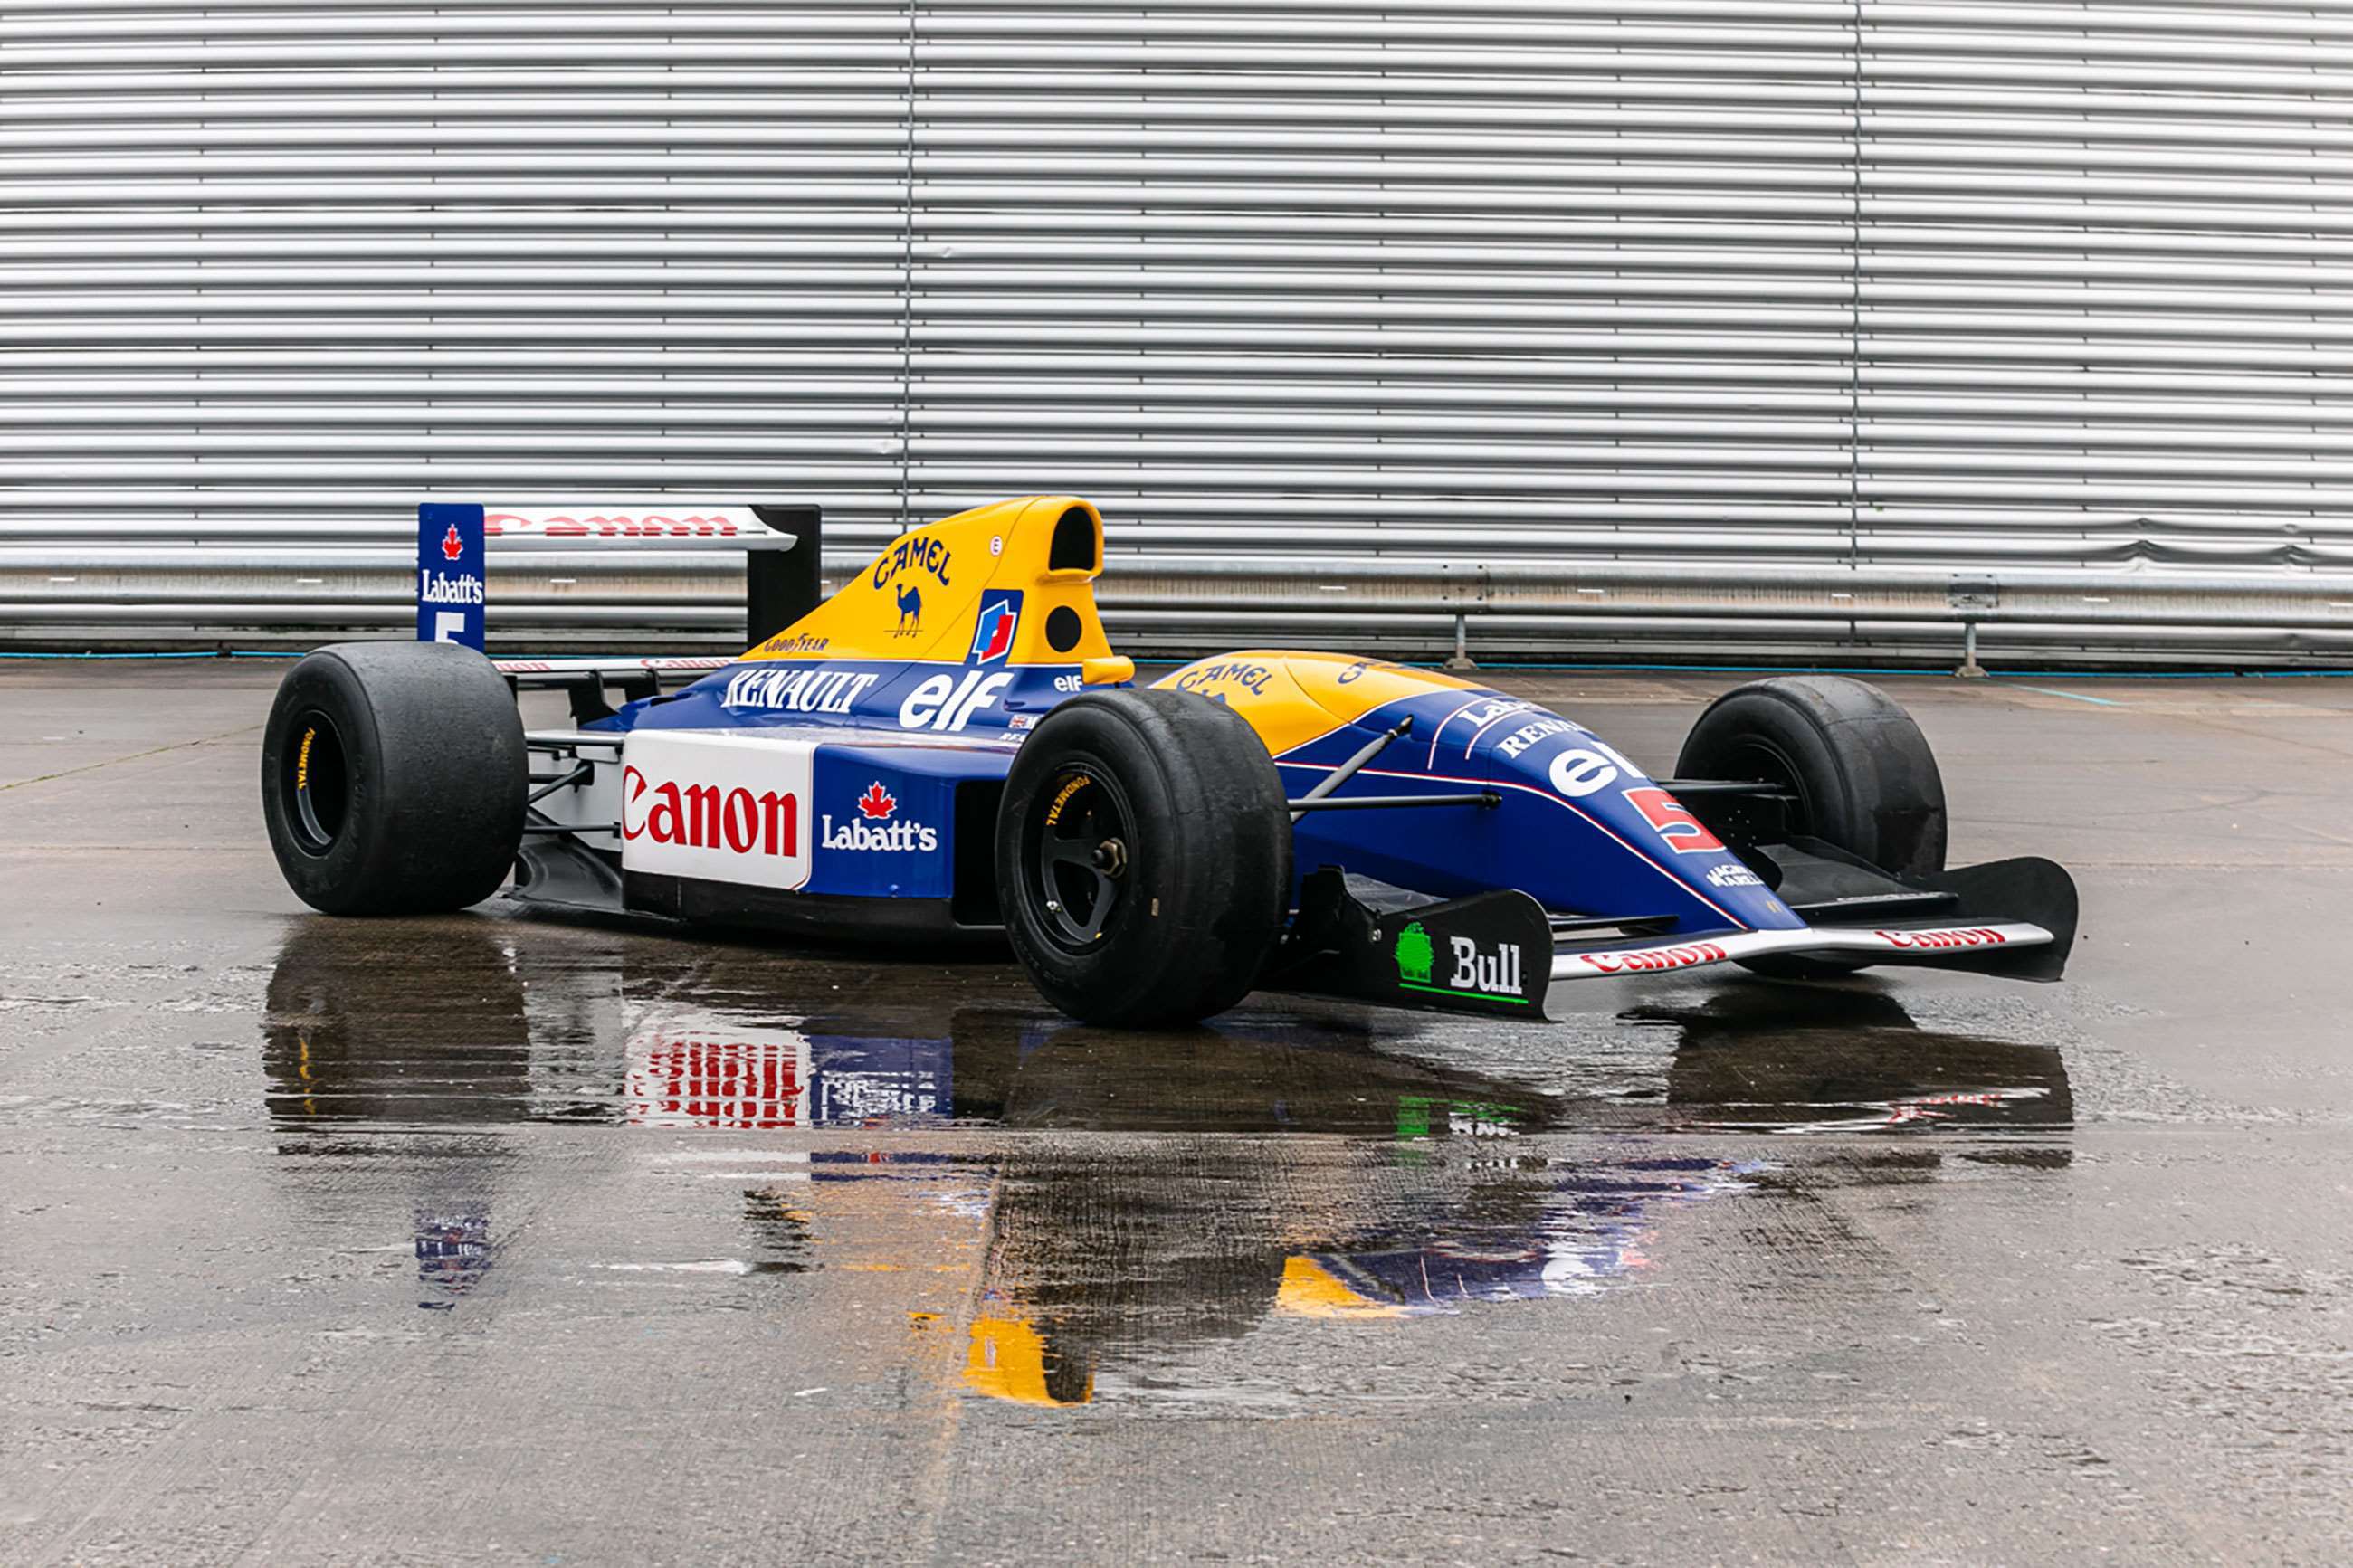 williams-fw14-show-car-silverstone-auctions-goodwood-04032021.jpg